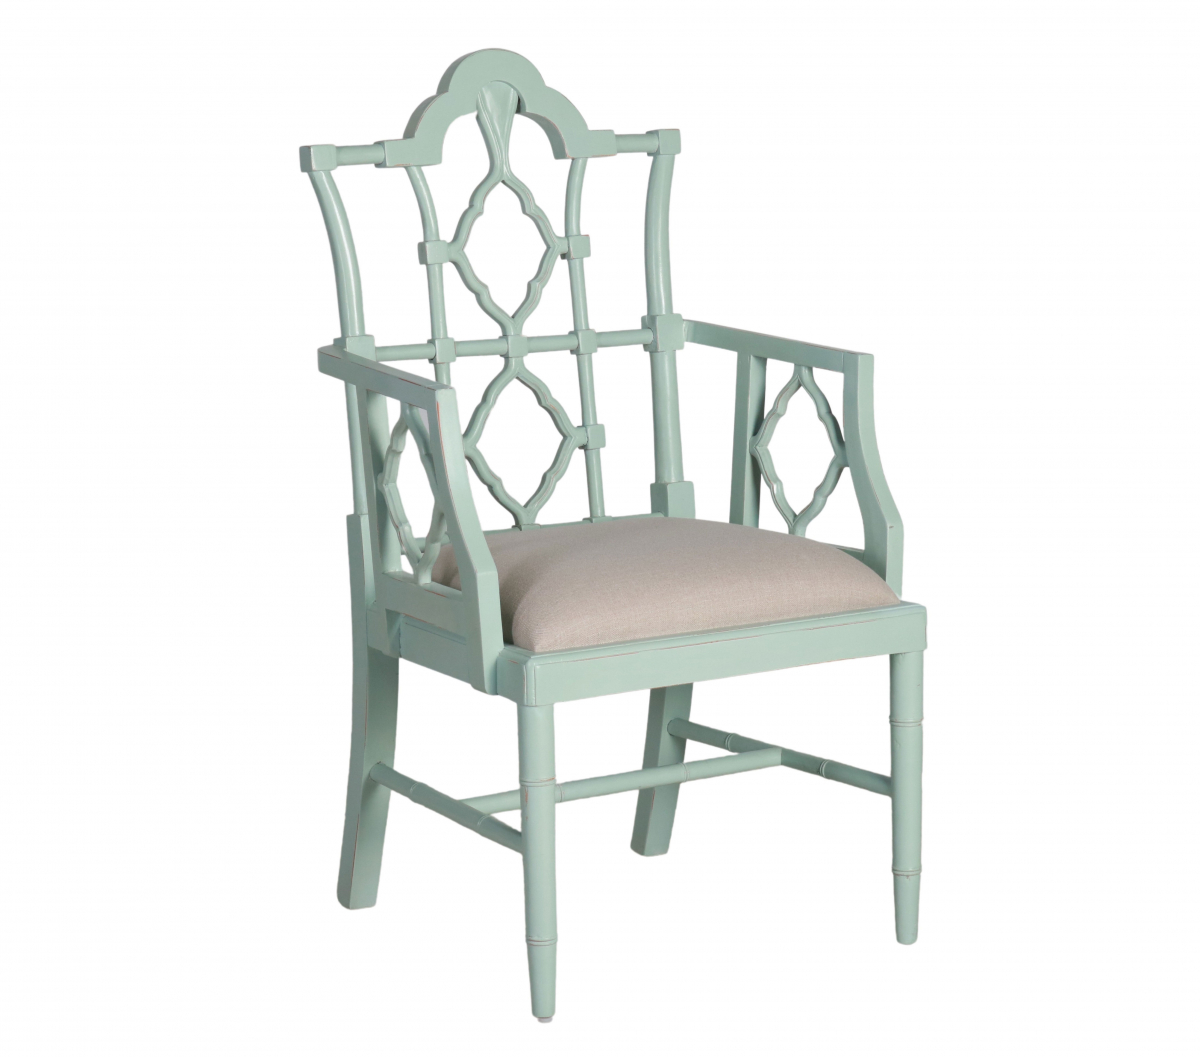 Mint green armchair with linen seat